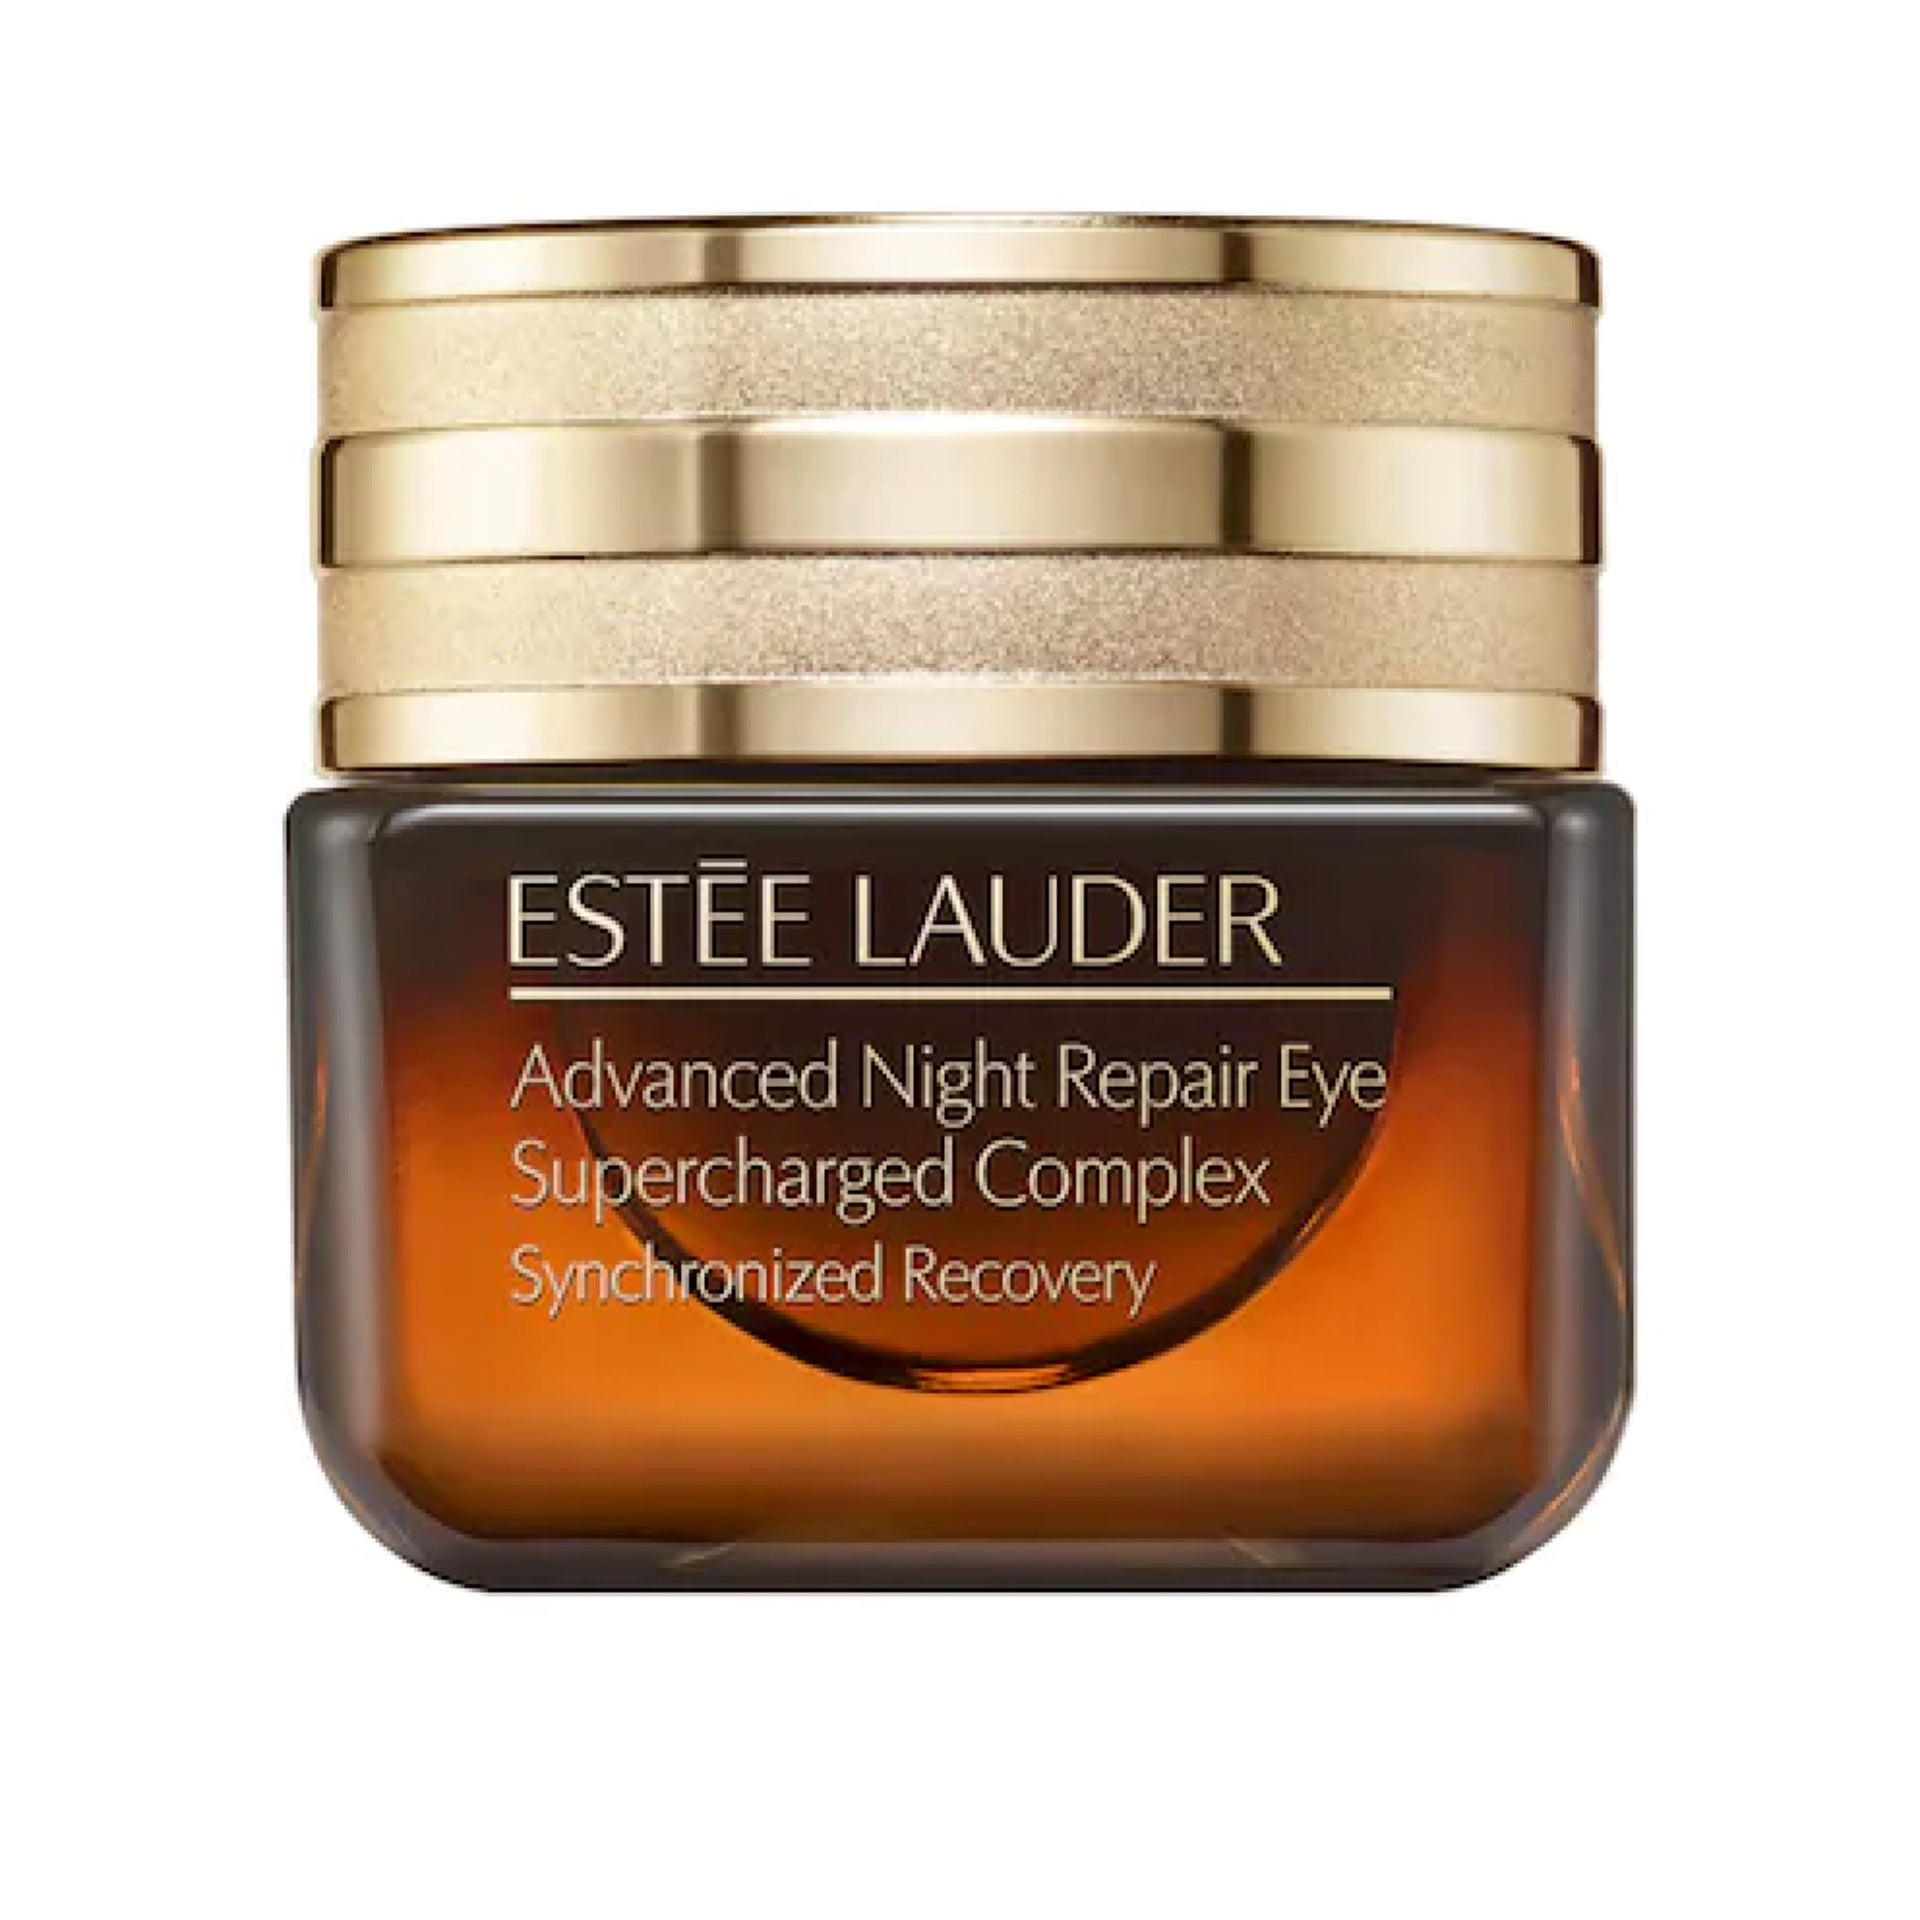 These Estée Lauder Finds Are Worth The Buy, According To Reviews